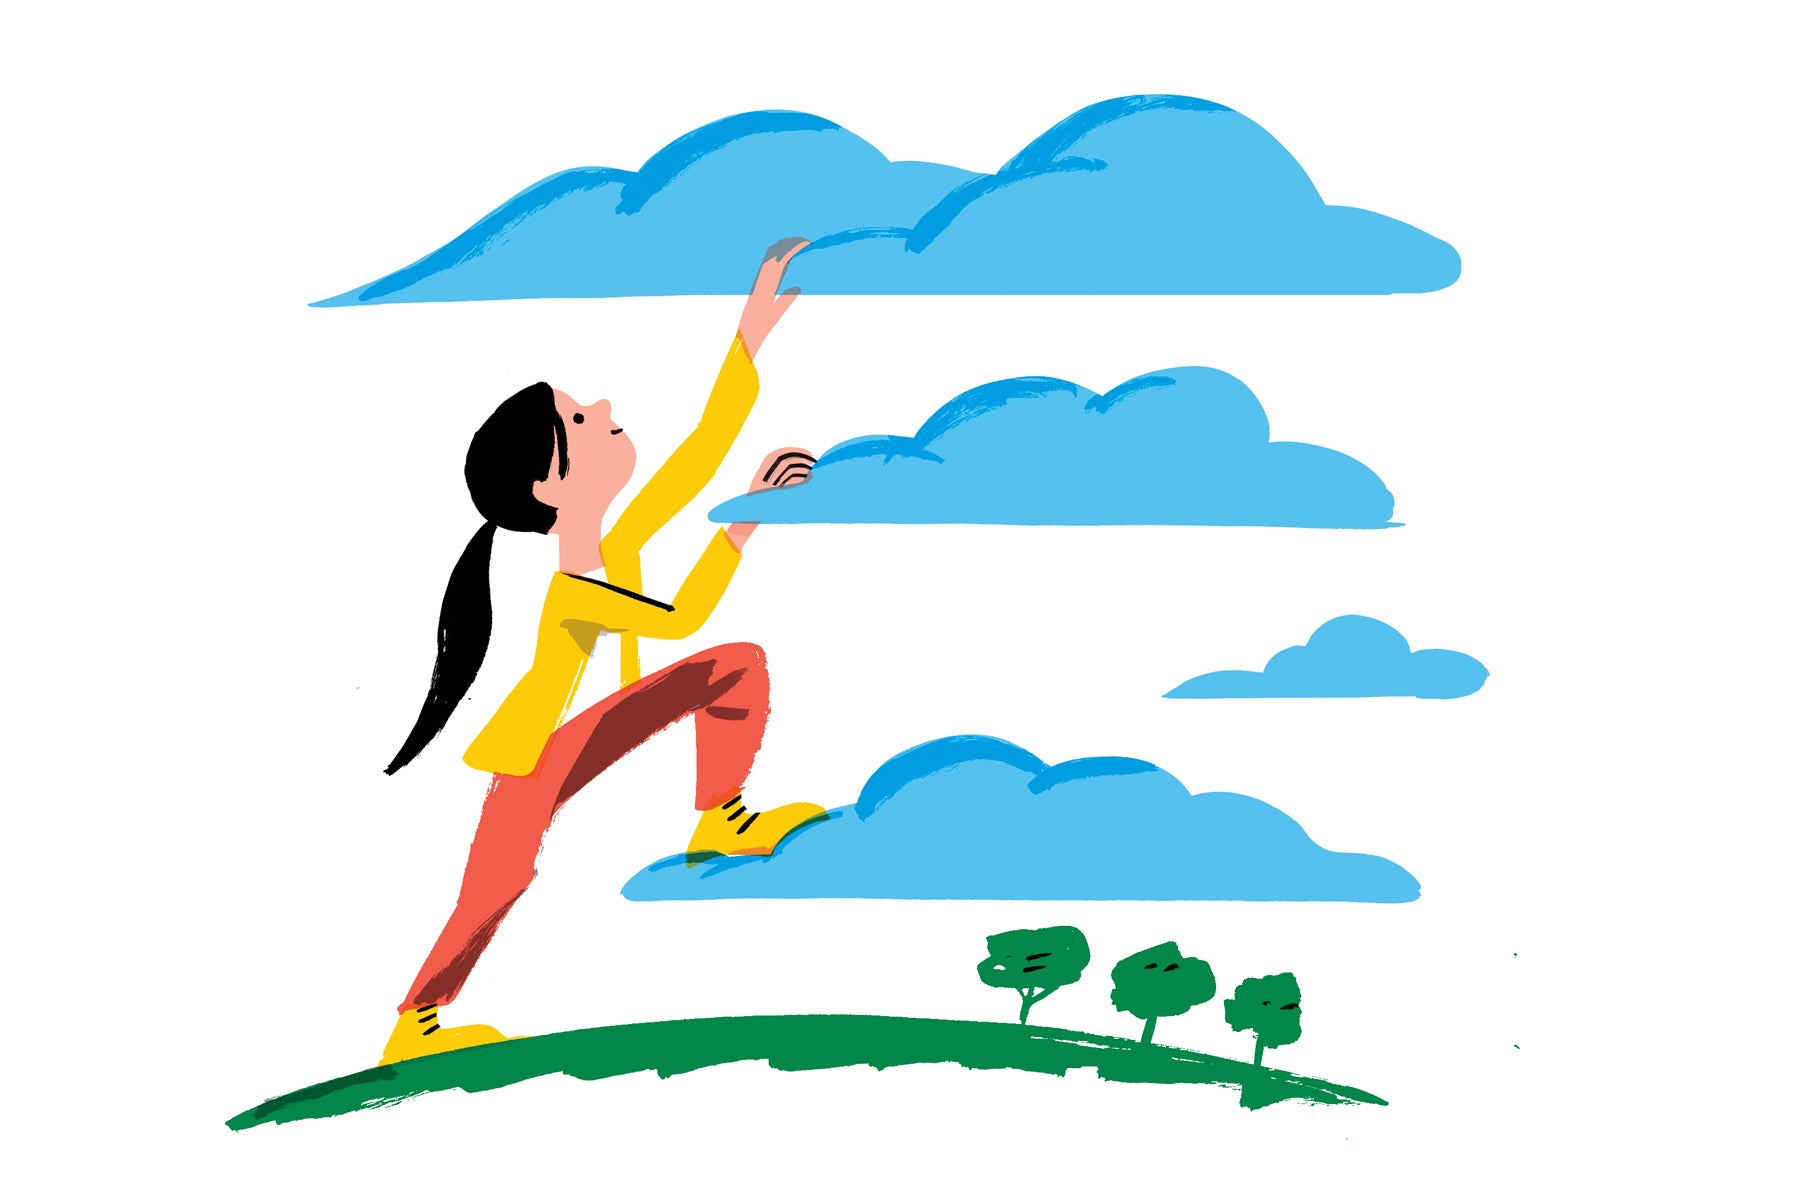 Illustration of a young girl with brown hair and a yellow shirt on, with clouds above her. The clouds are staggered and she is climbing them like steps as a metaphor for reaching for her goals. 